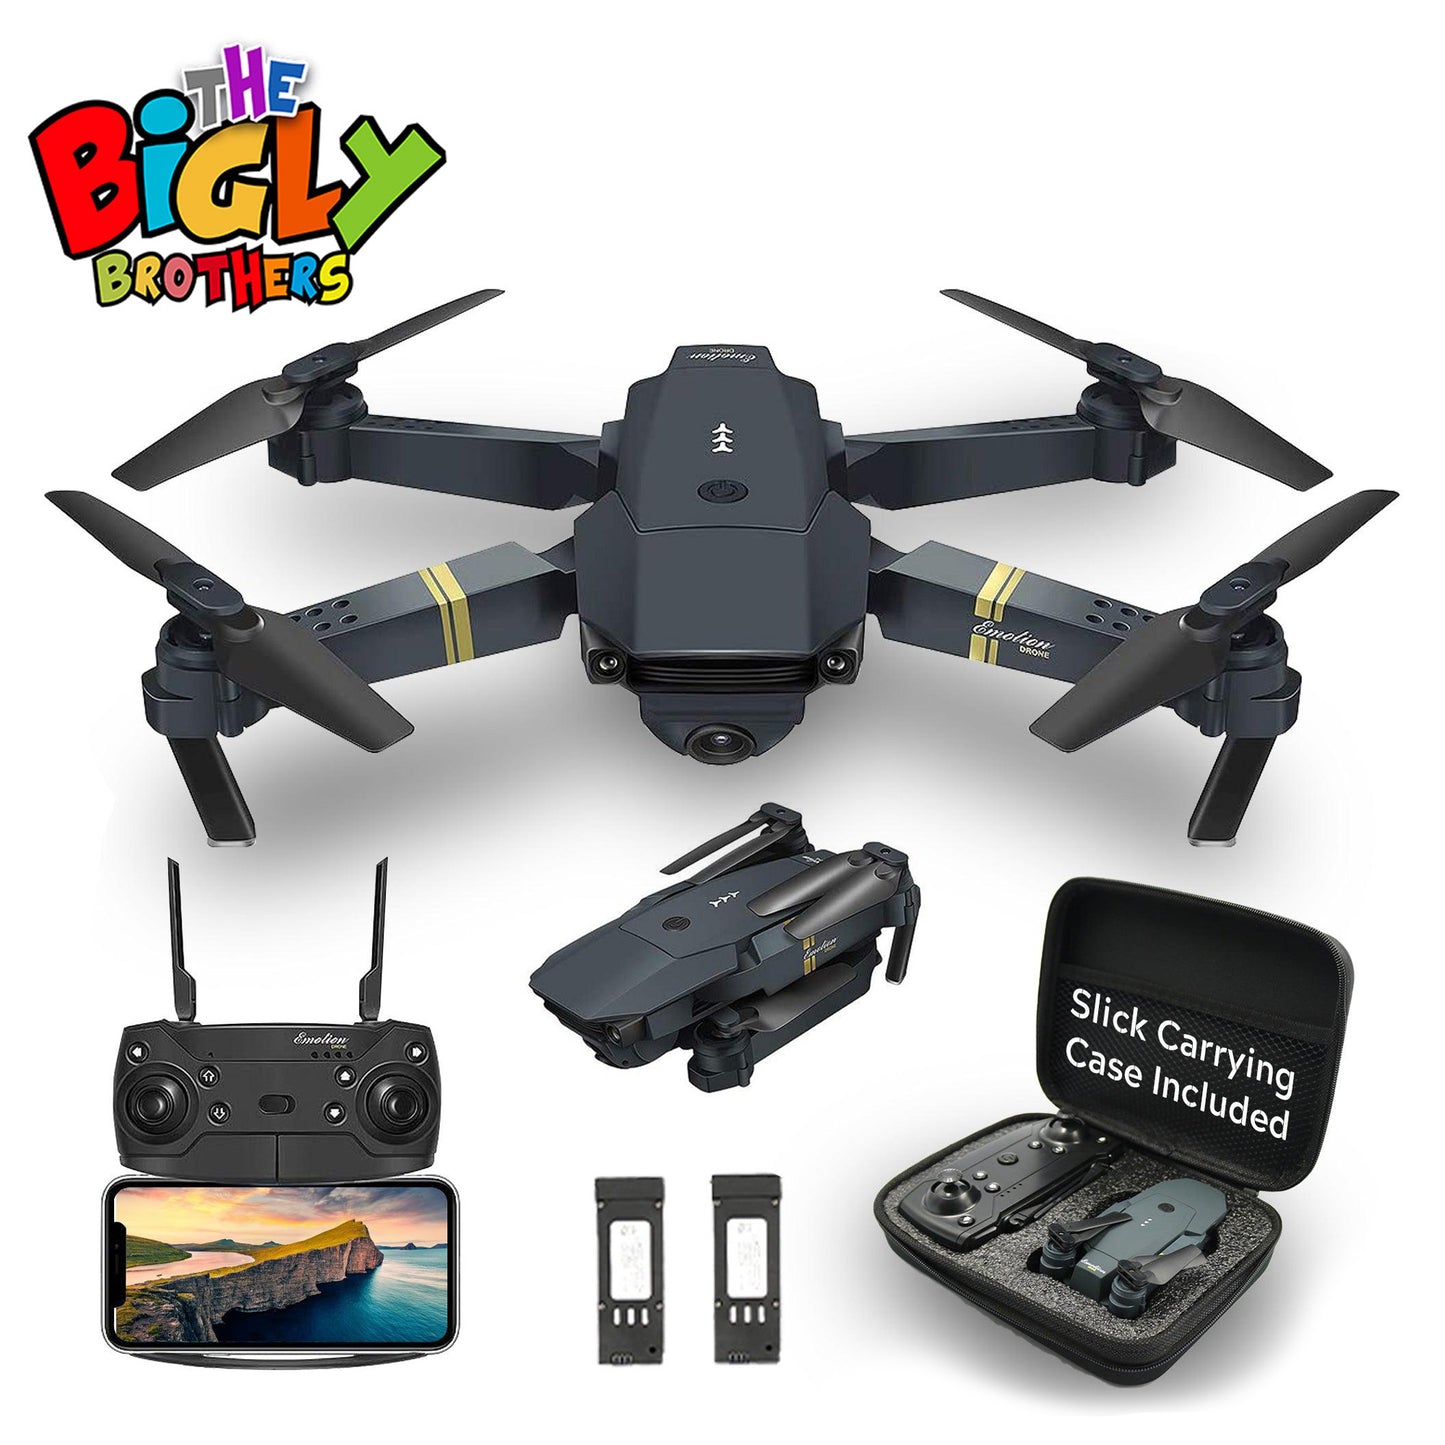 REFURBISHED: The Bigly Brothers E58 Pro Edition Drone with Camera, 1080p Black Drone and Black Carrying Case with 2 batteries included. Ready to Fly, No Assembly required.